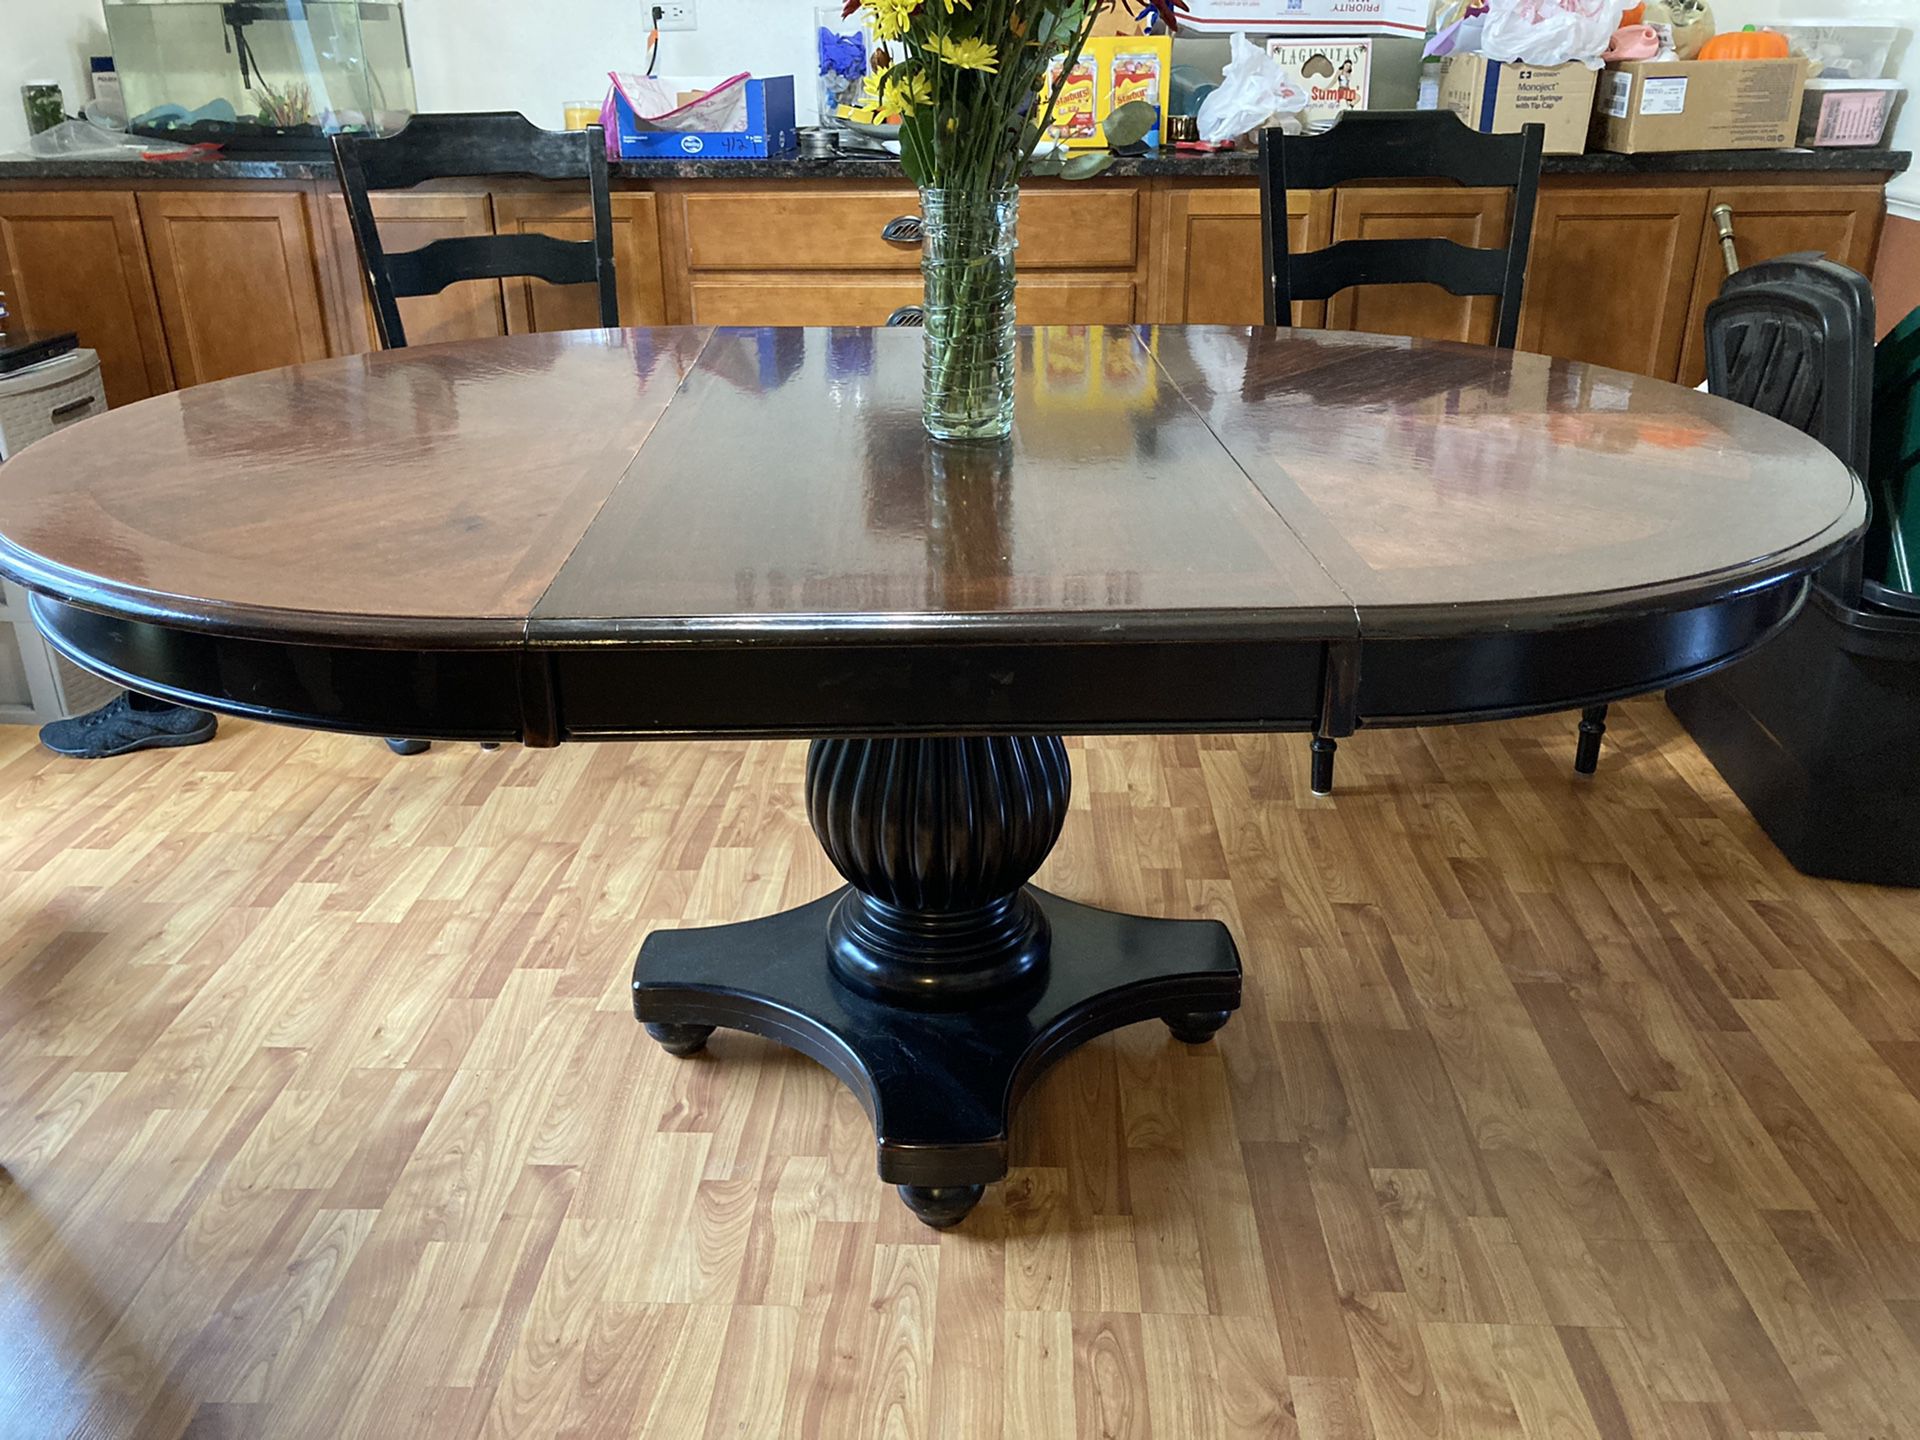 FREE! Kitchen table 70x48 with leaf. 48x48 without leaf. No Chairs